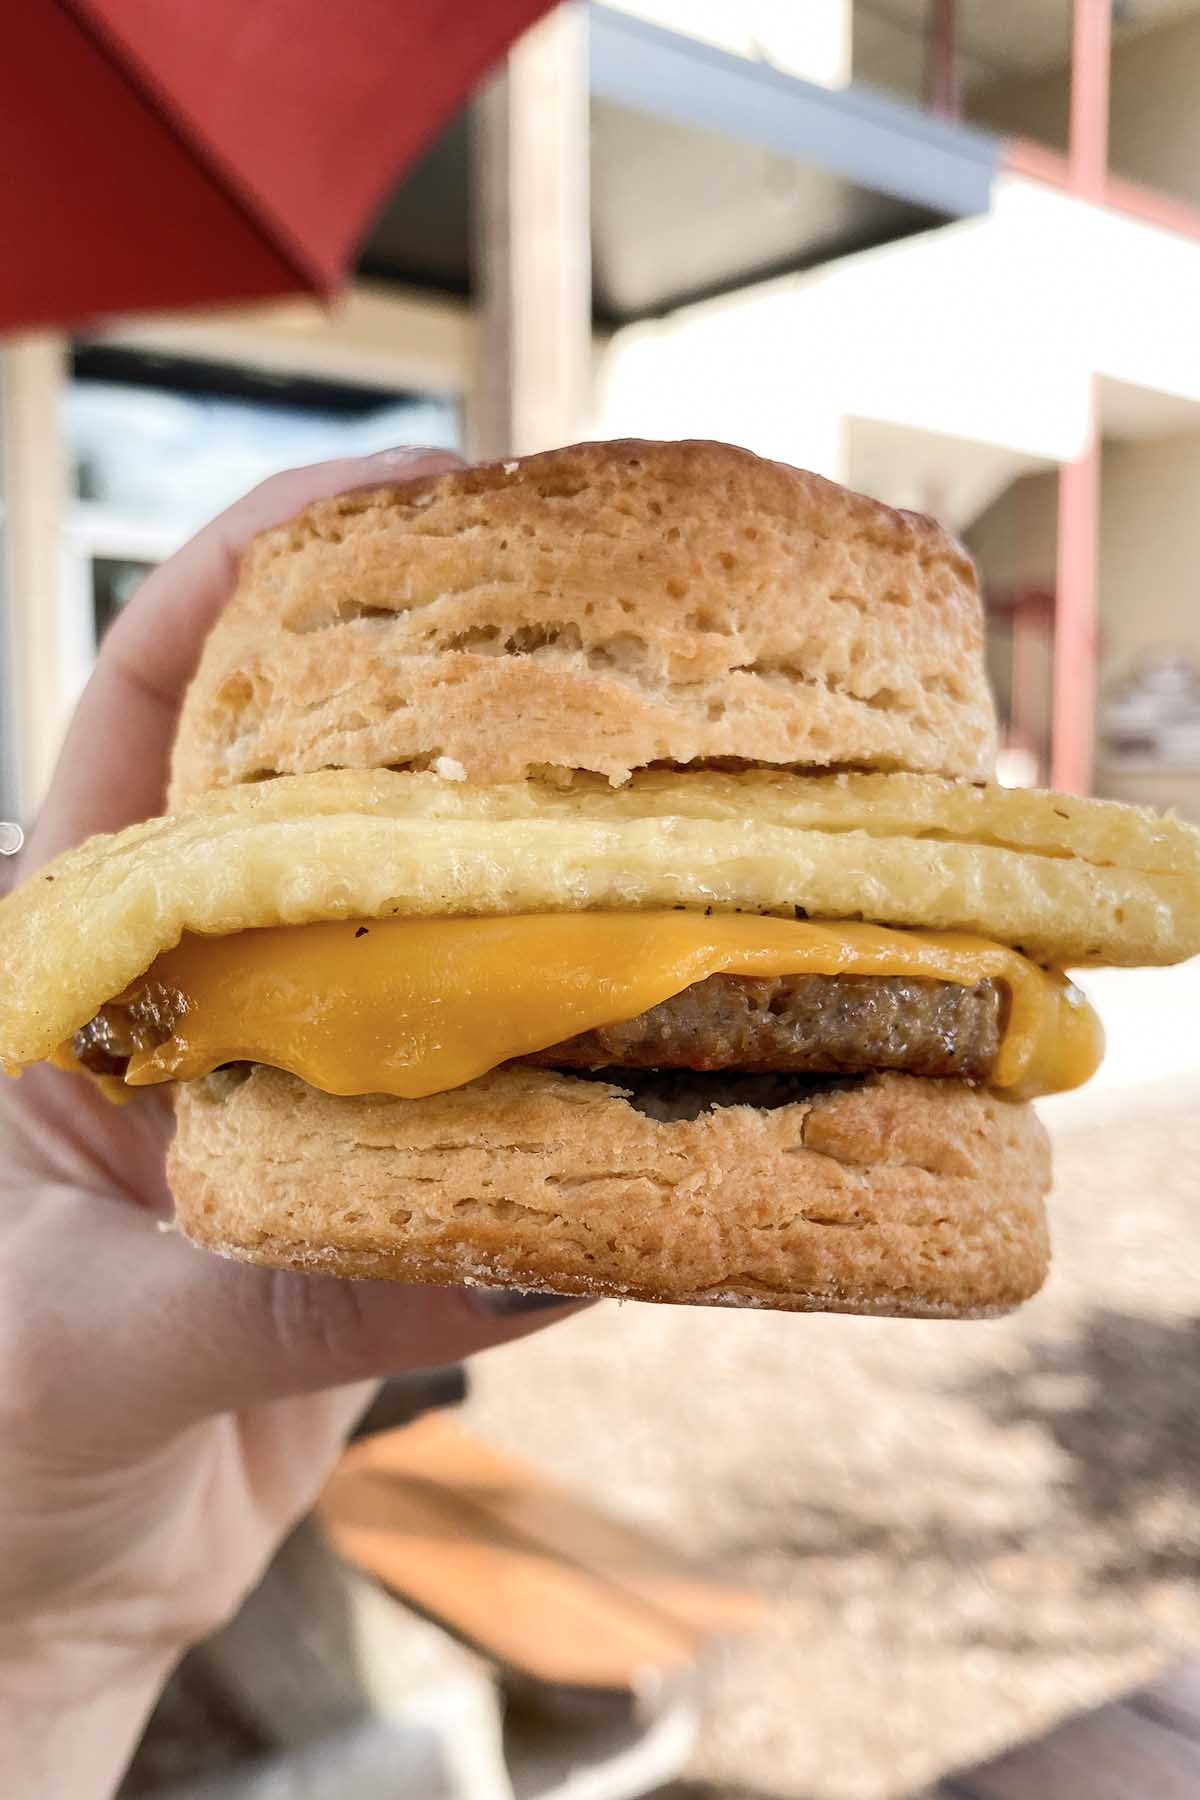 hand holding a biscuit sandwich with vegan sausage, Just egg, and non-dairy cheese